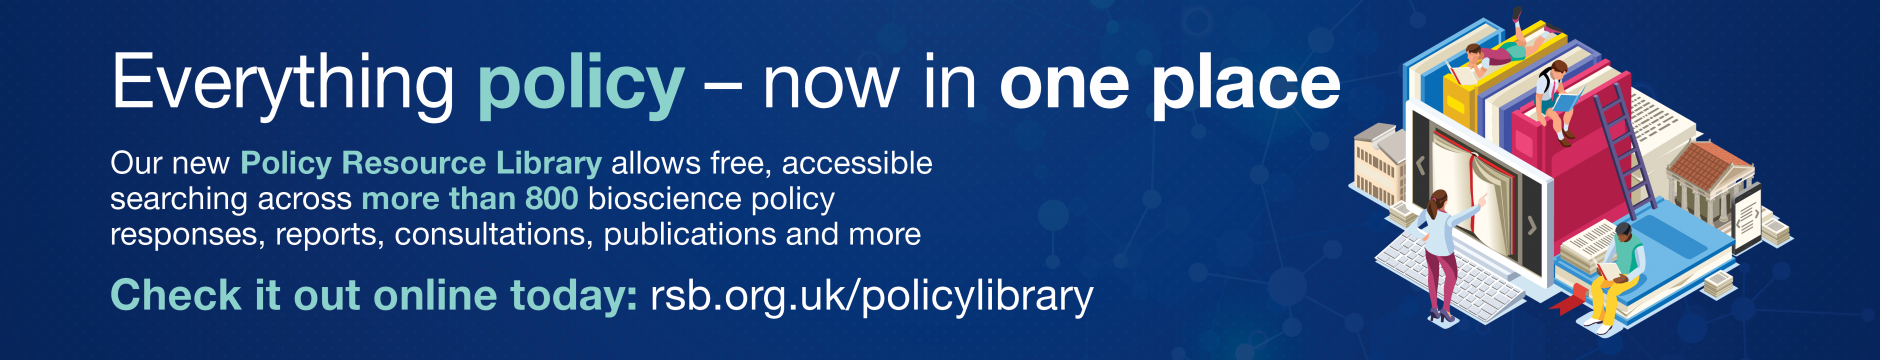 Policy resource library